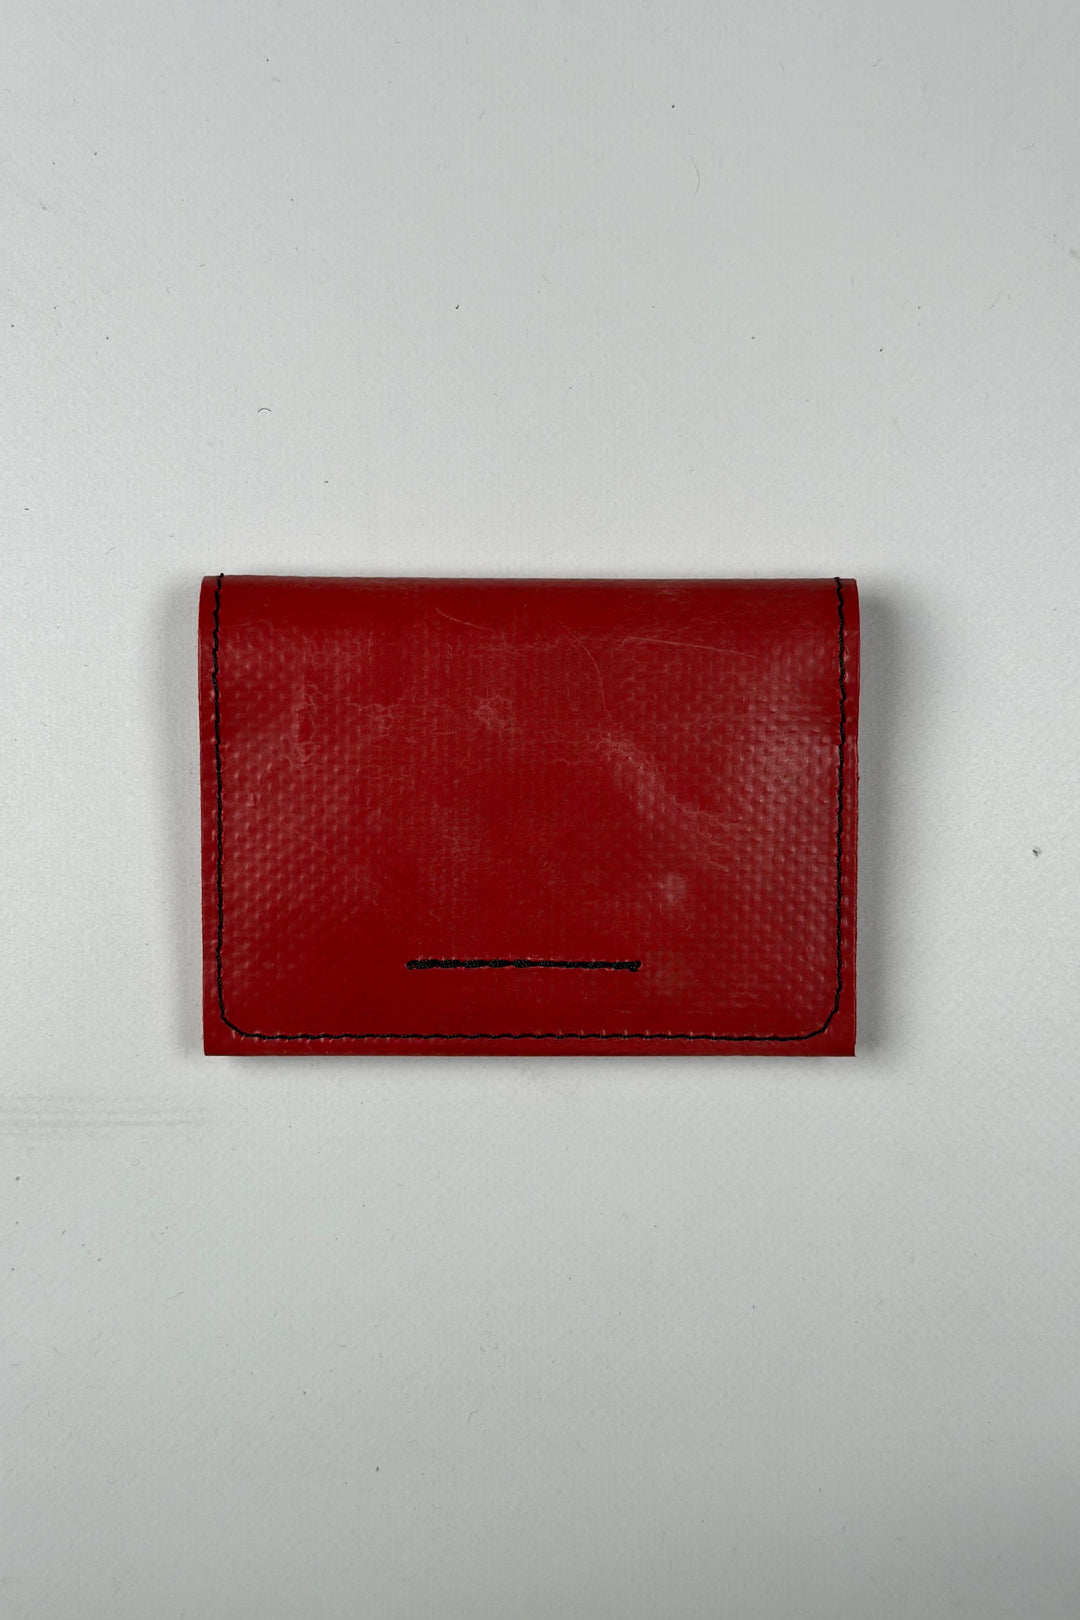 LAZARUS F280 Wallet Extra Small